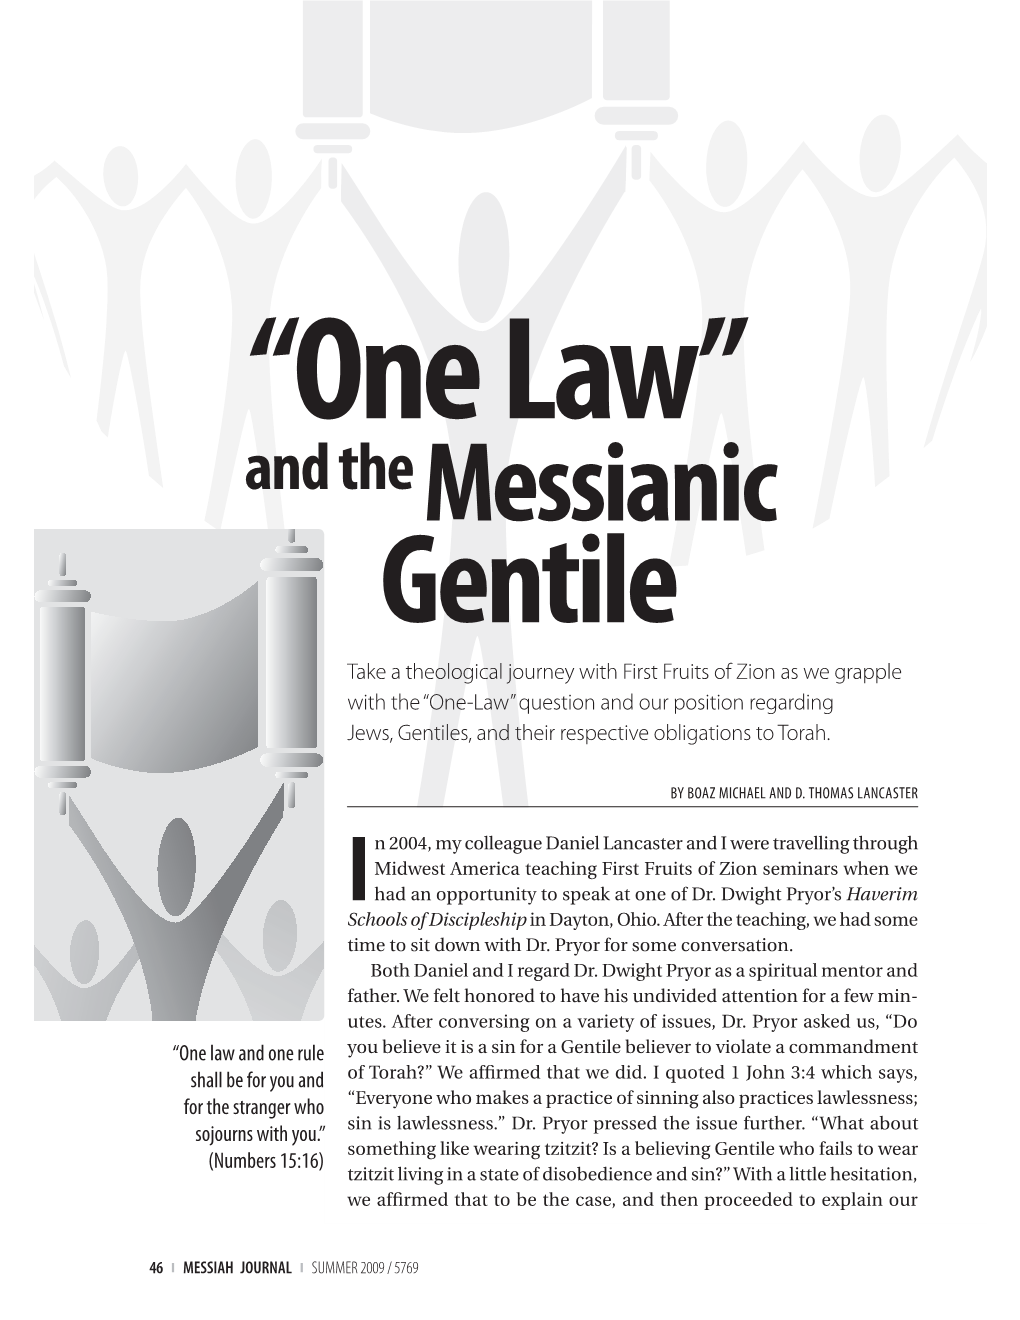 One Law and the Messianic Gentile